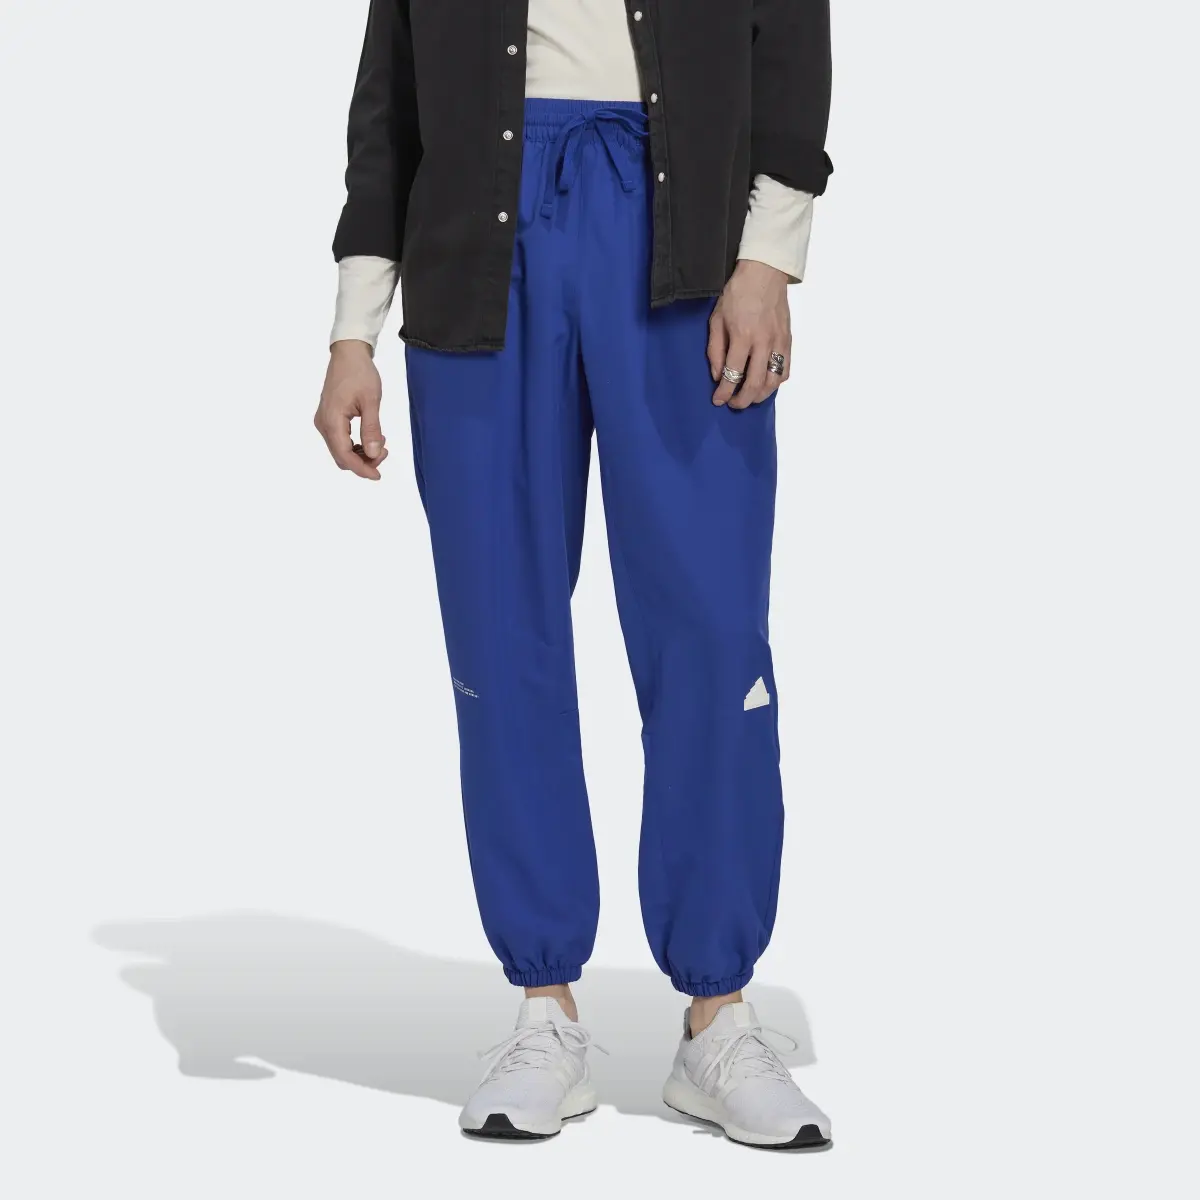 Adidas Woven Tracksuit Bottoms. 1